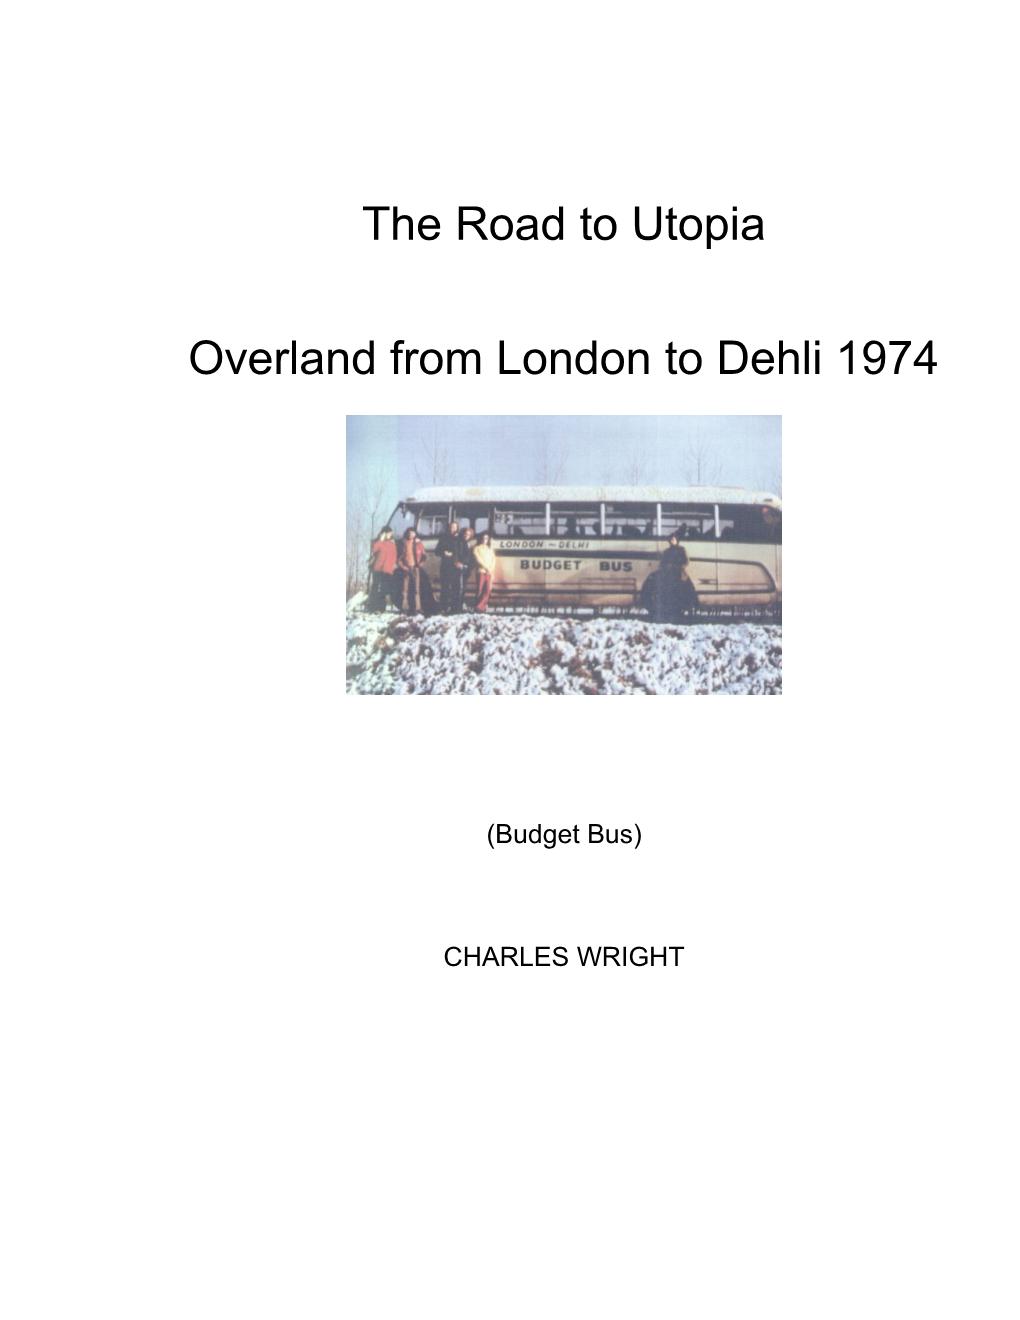 Overland from London to Dehli 1974